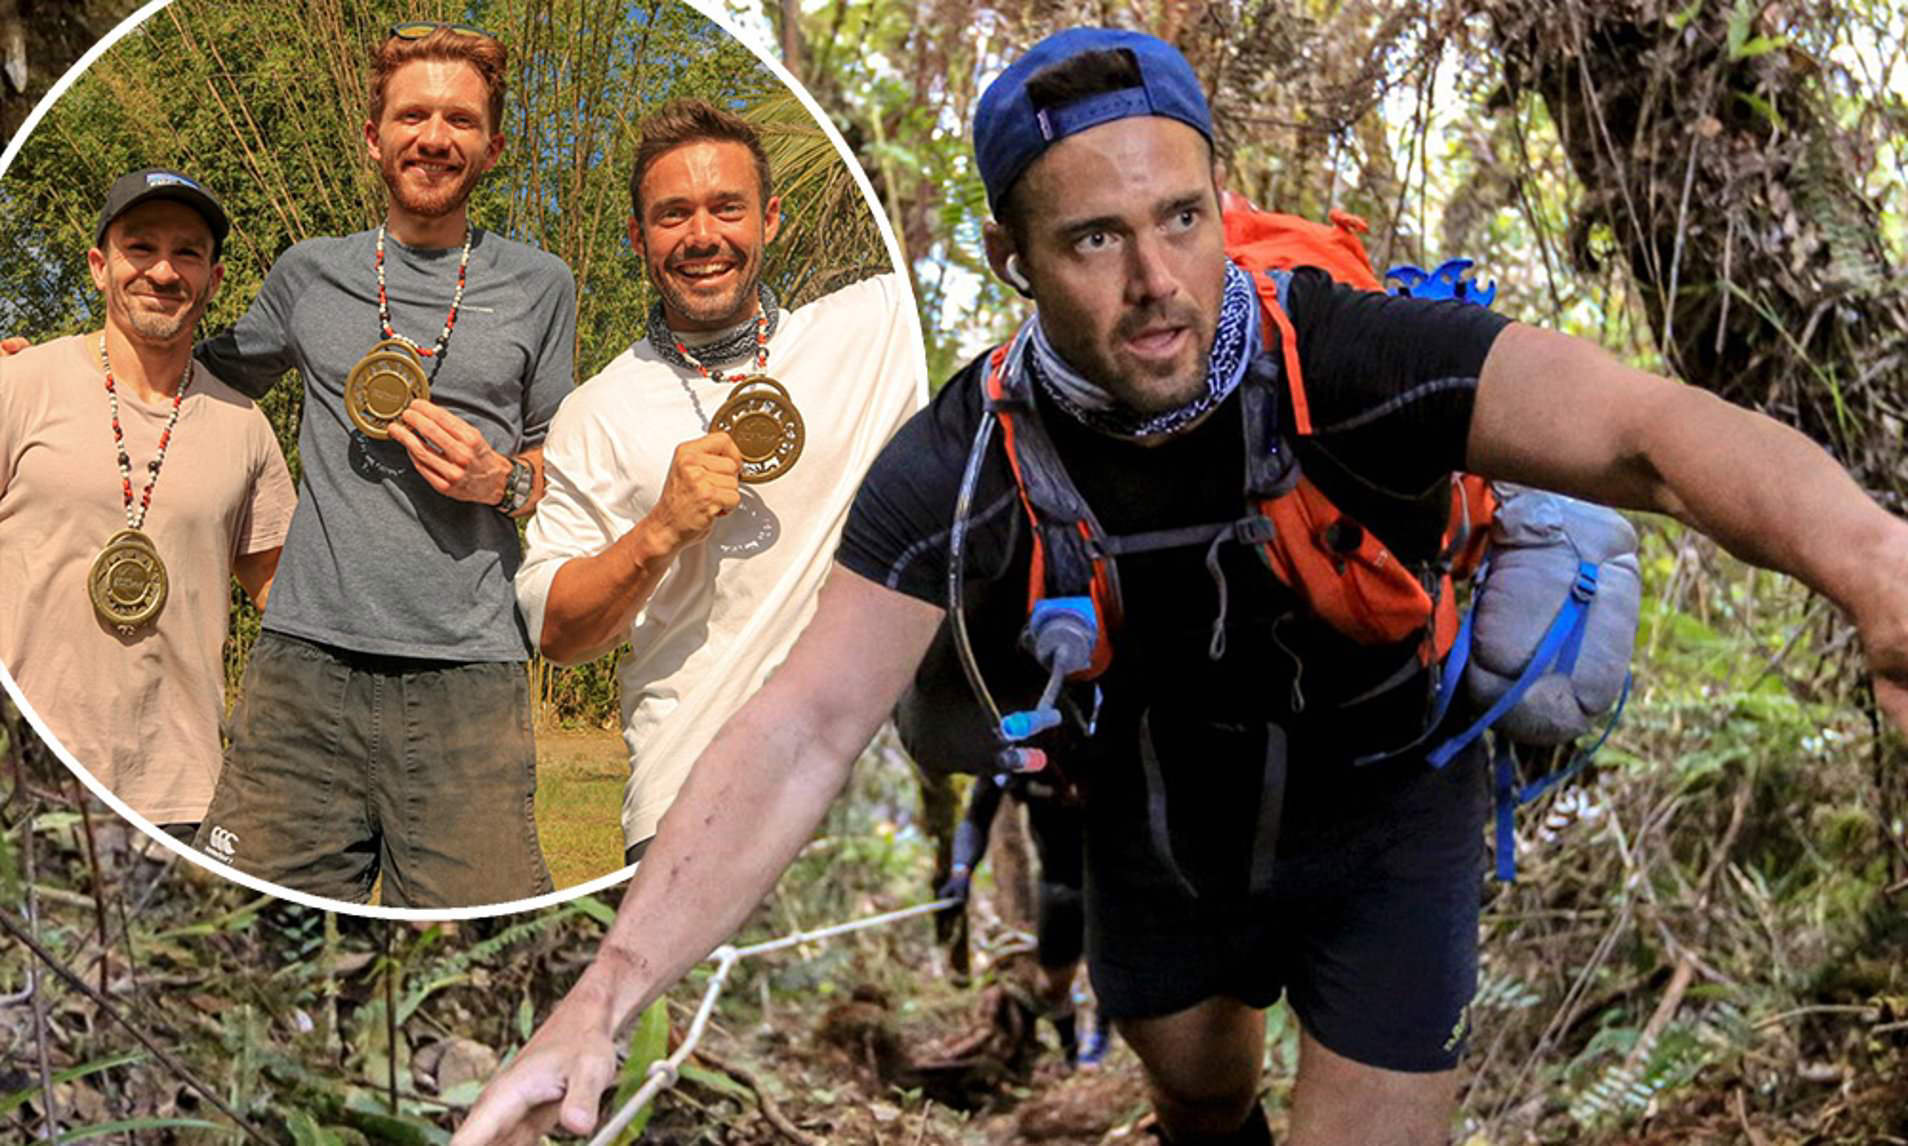 Spencer Matthews finishes third in The Jungle Ultra